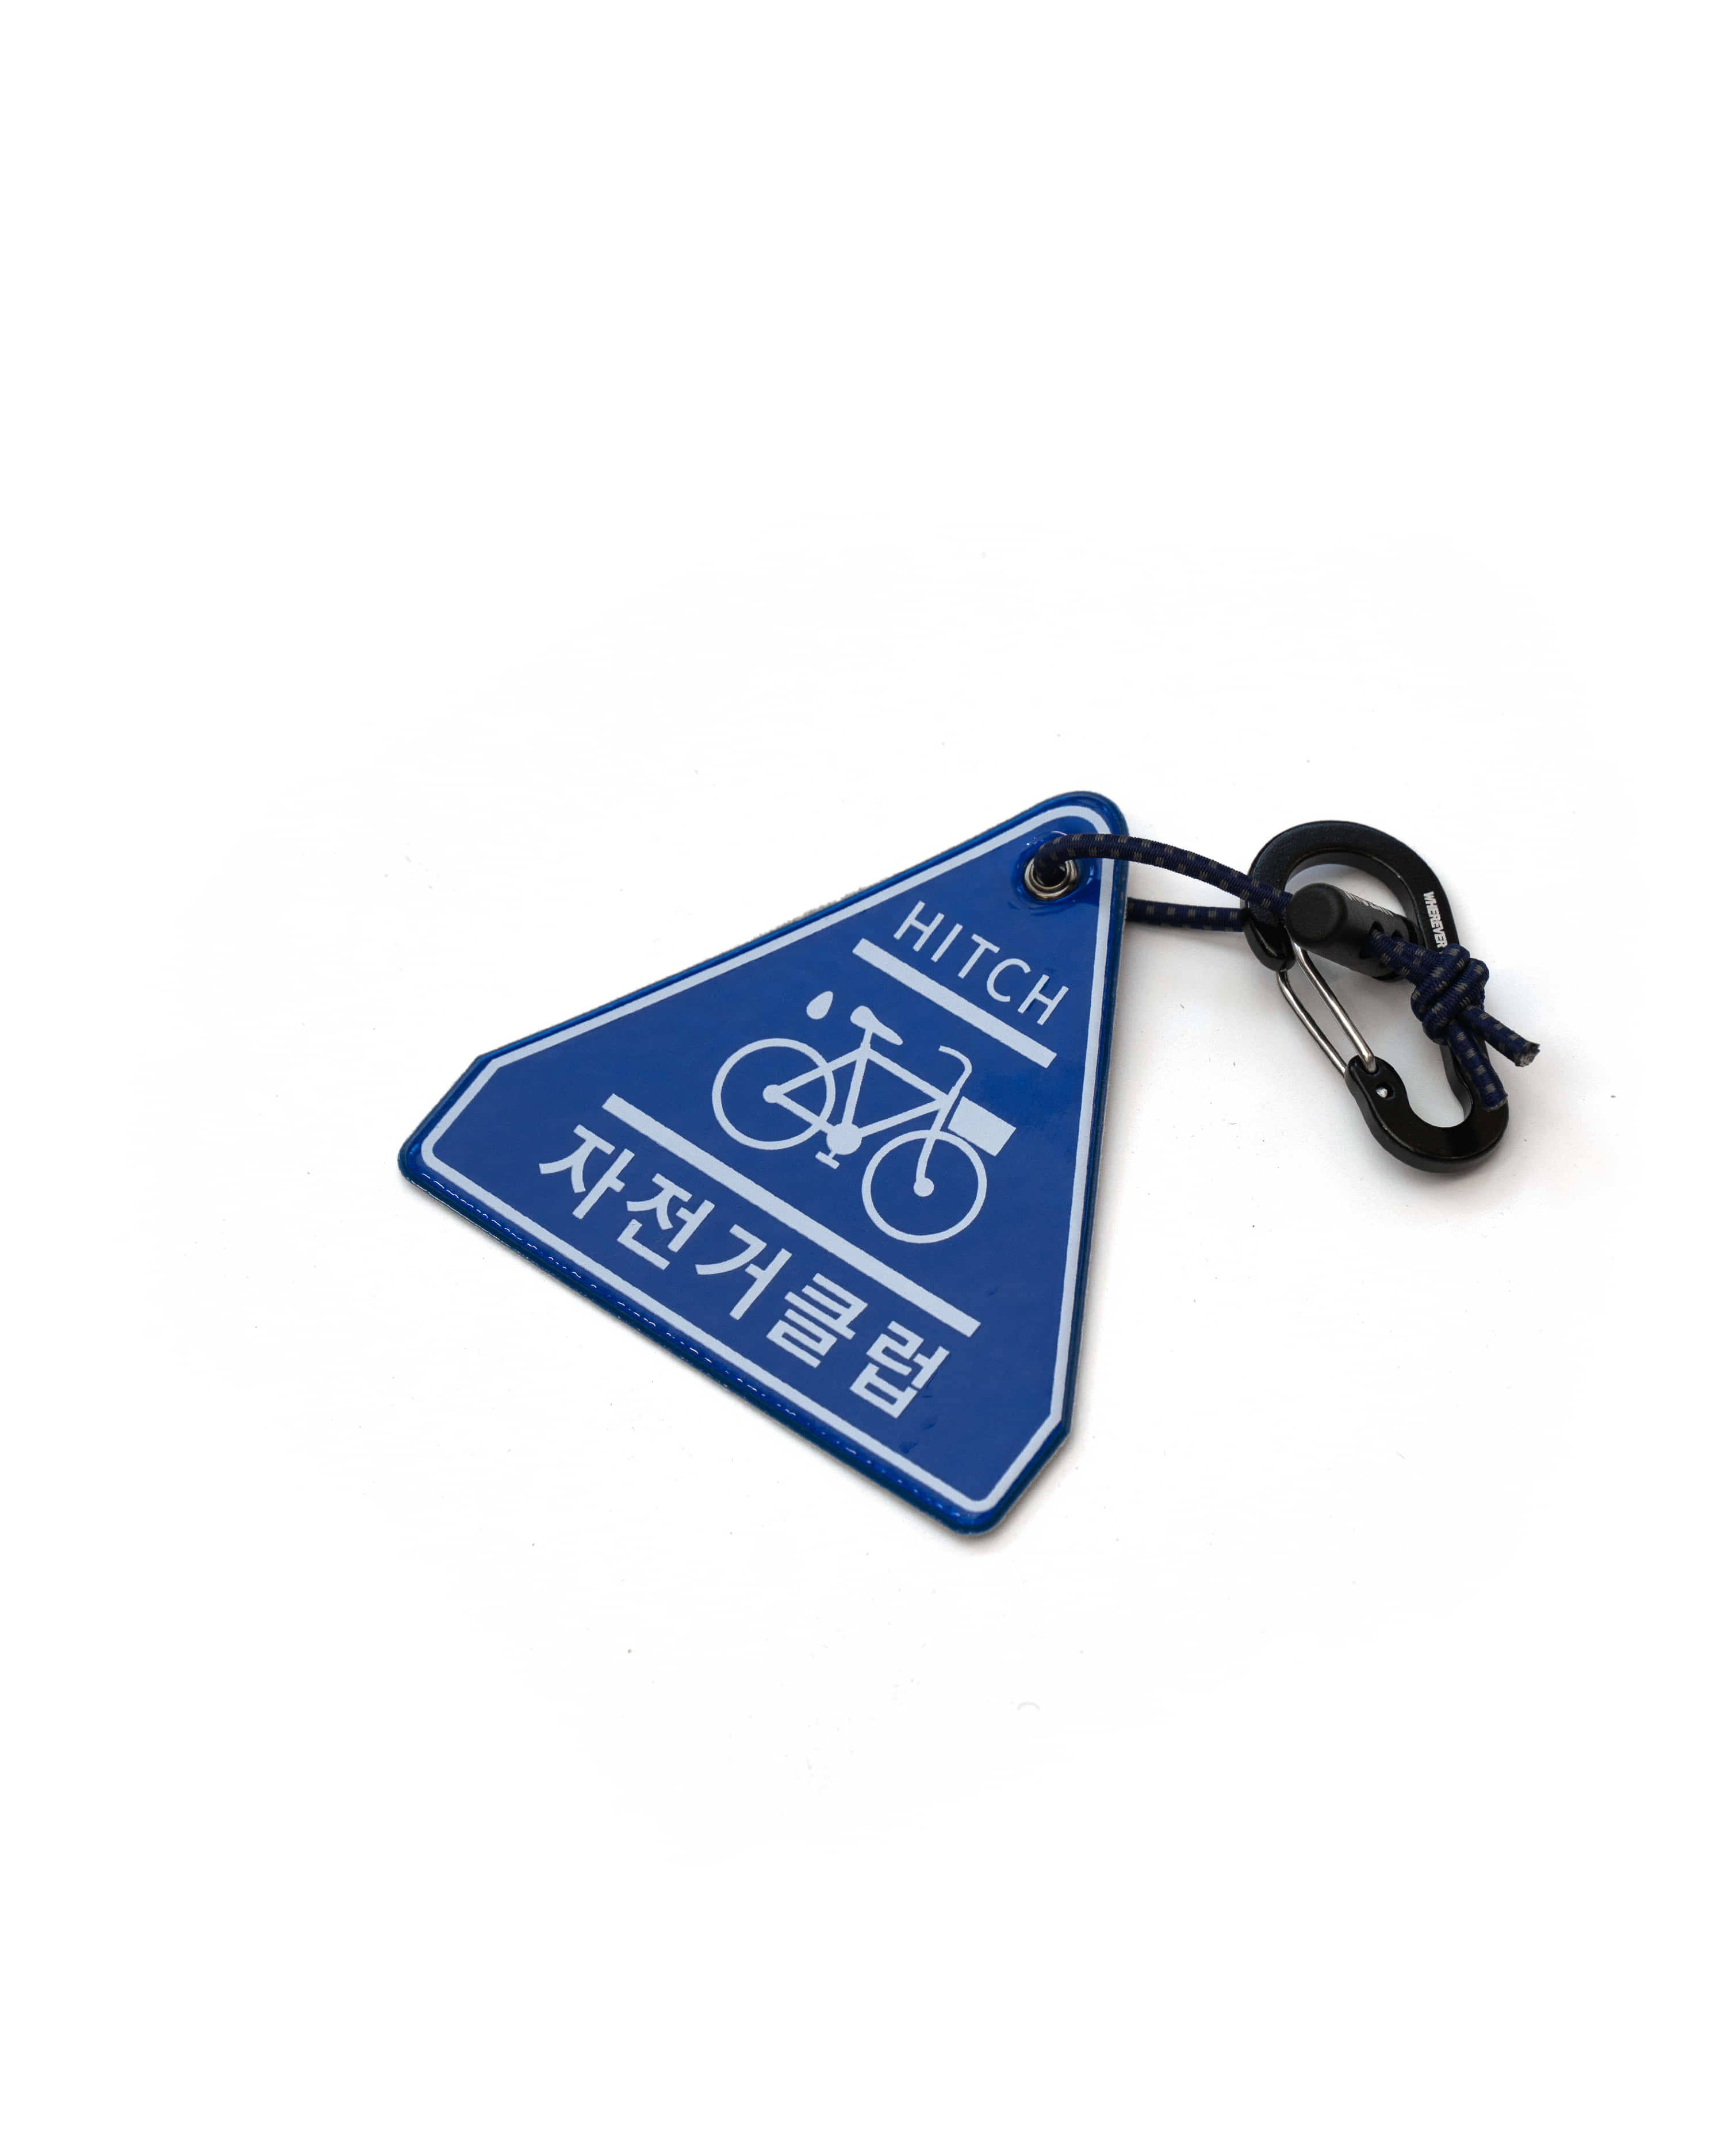 Reflector Hitch Sign - blue